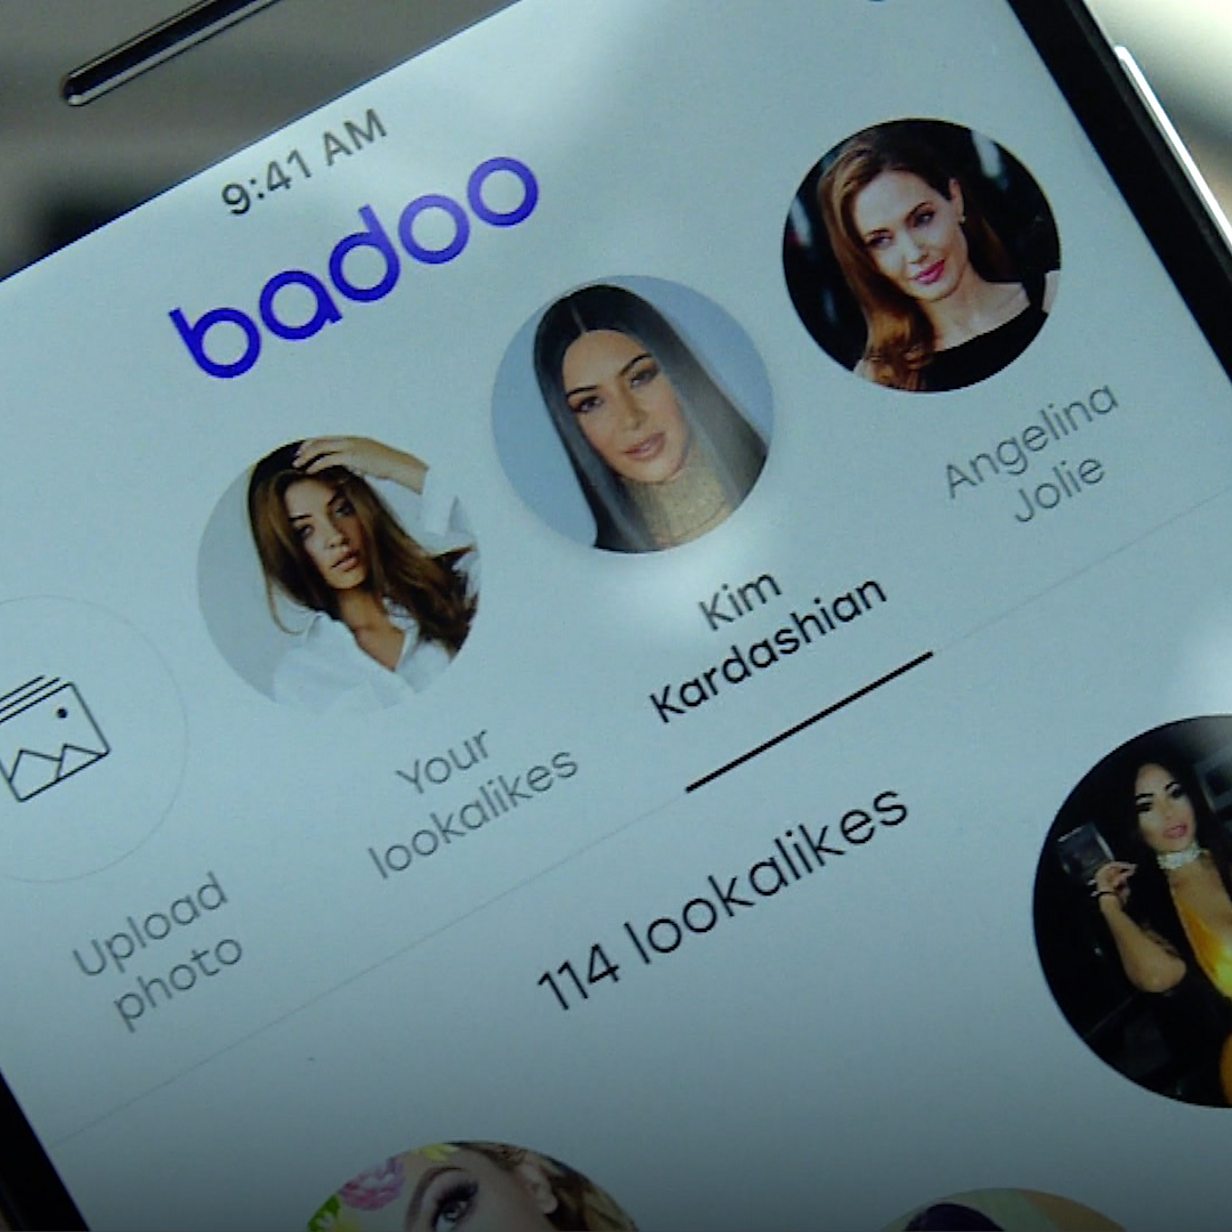 Badoo what happens when you swipe right 50 times